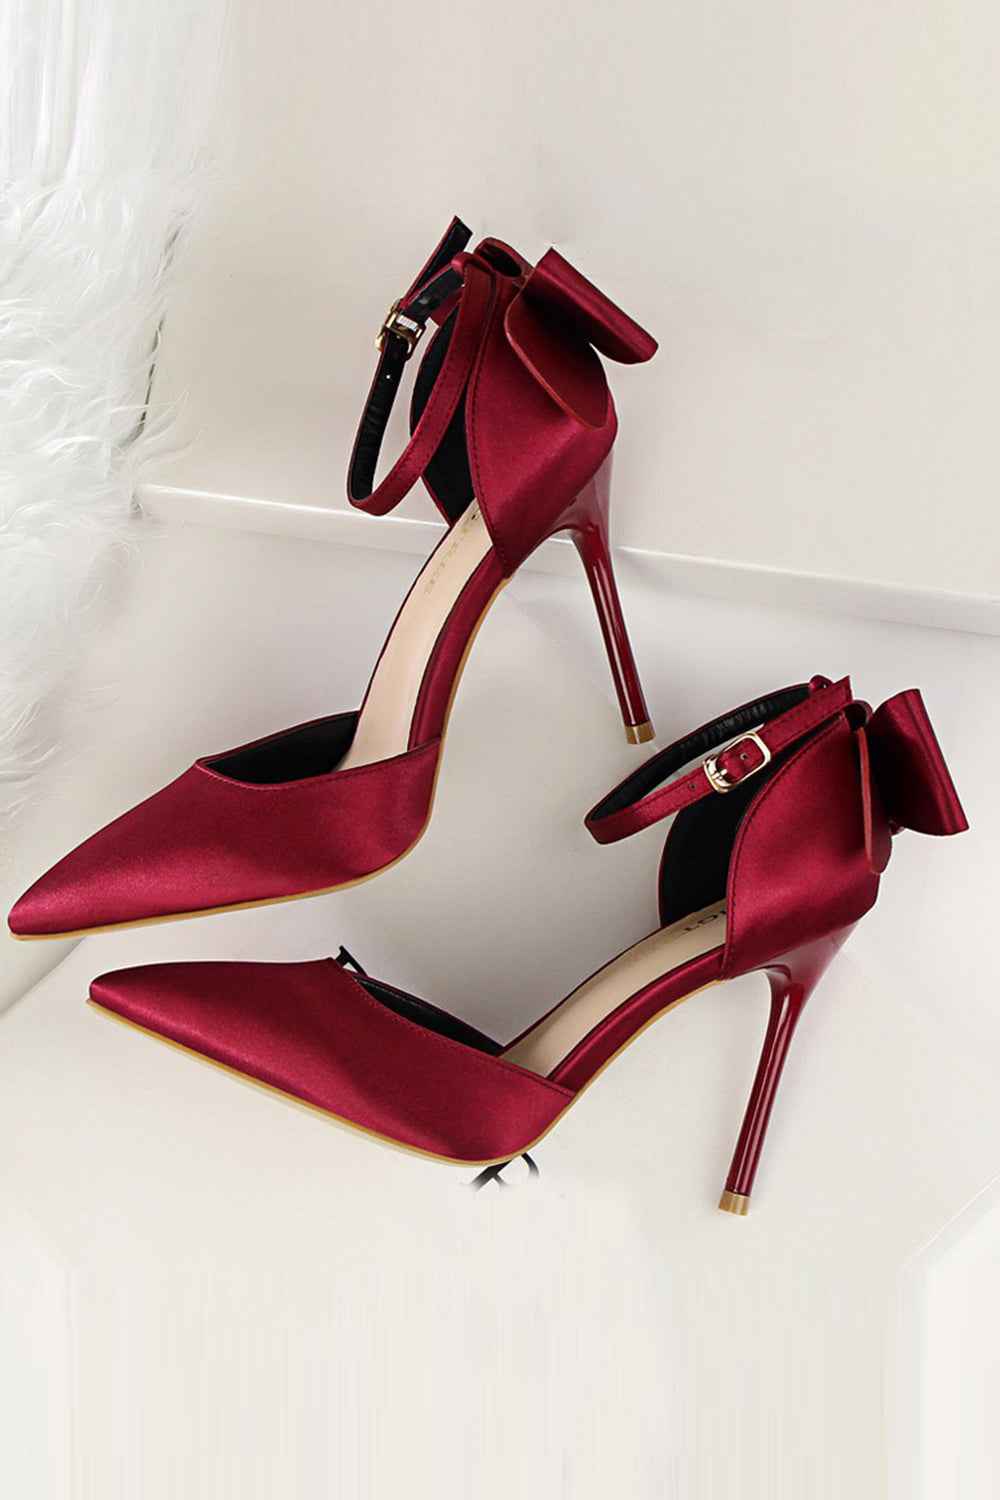 Burgundy Patent Leather Peep Toe T Strap Sexy High Heels Shoes | FSJshoes